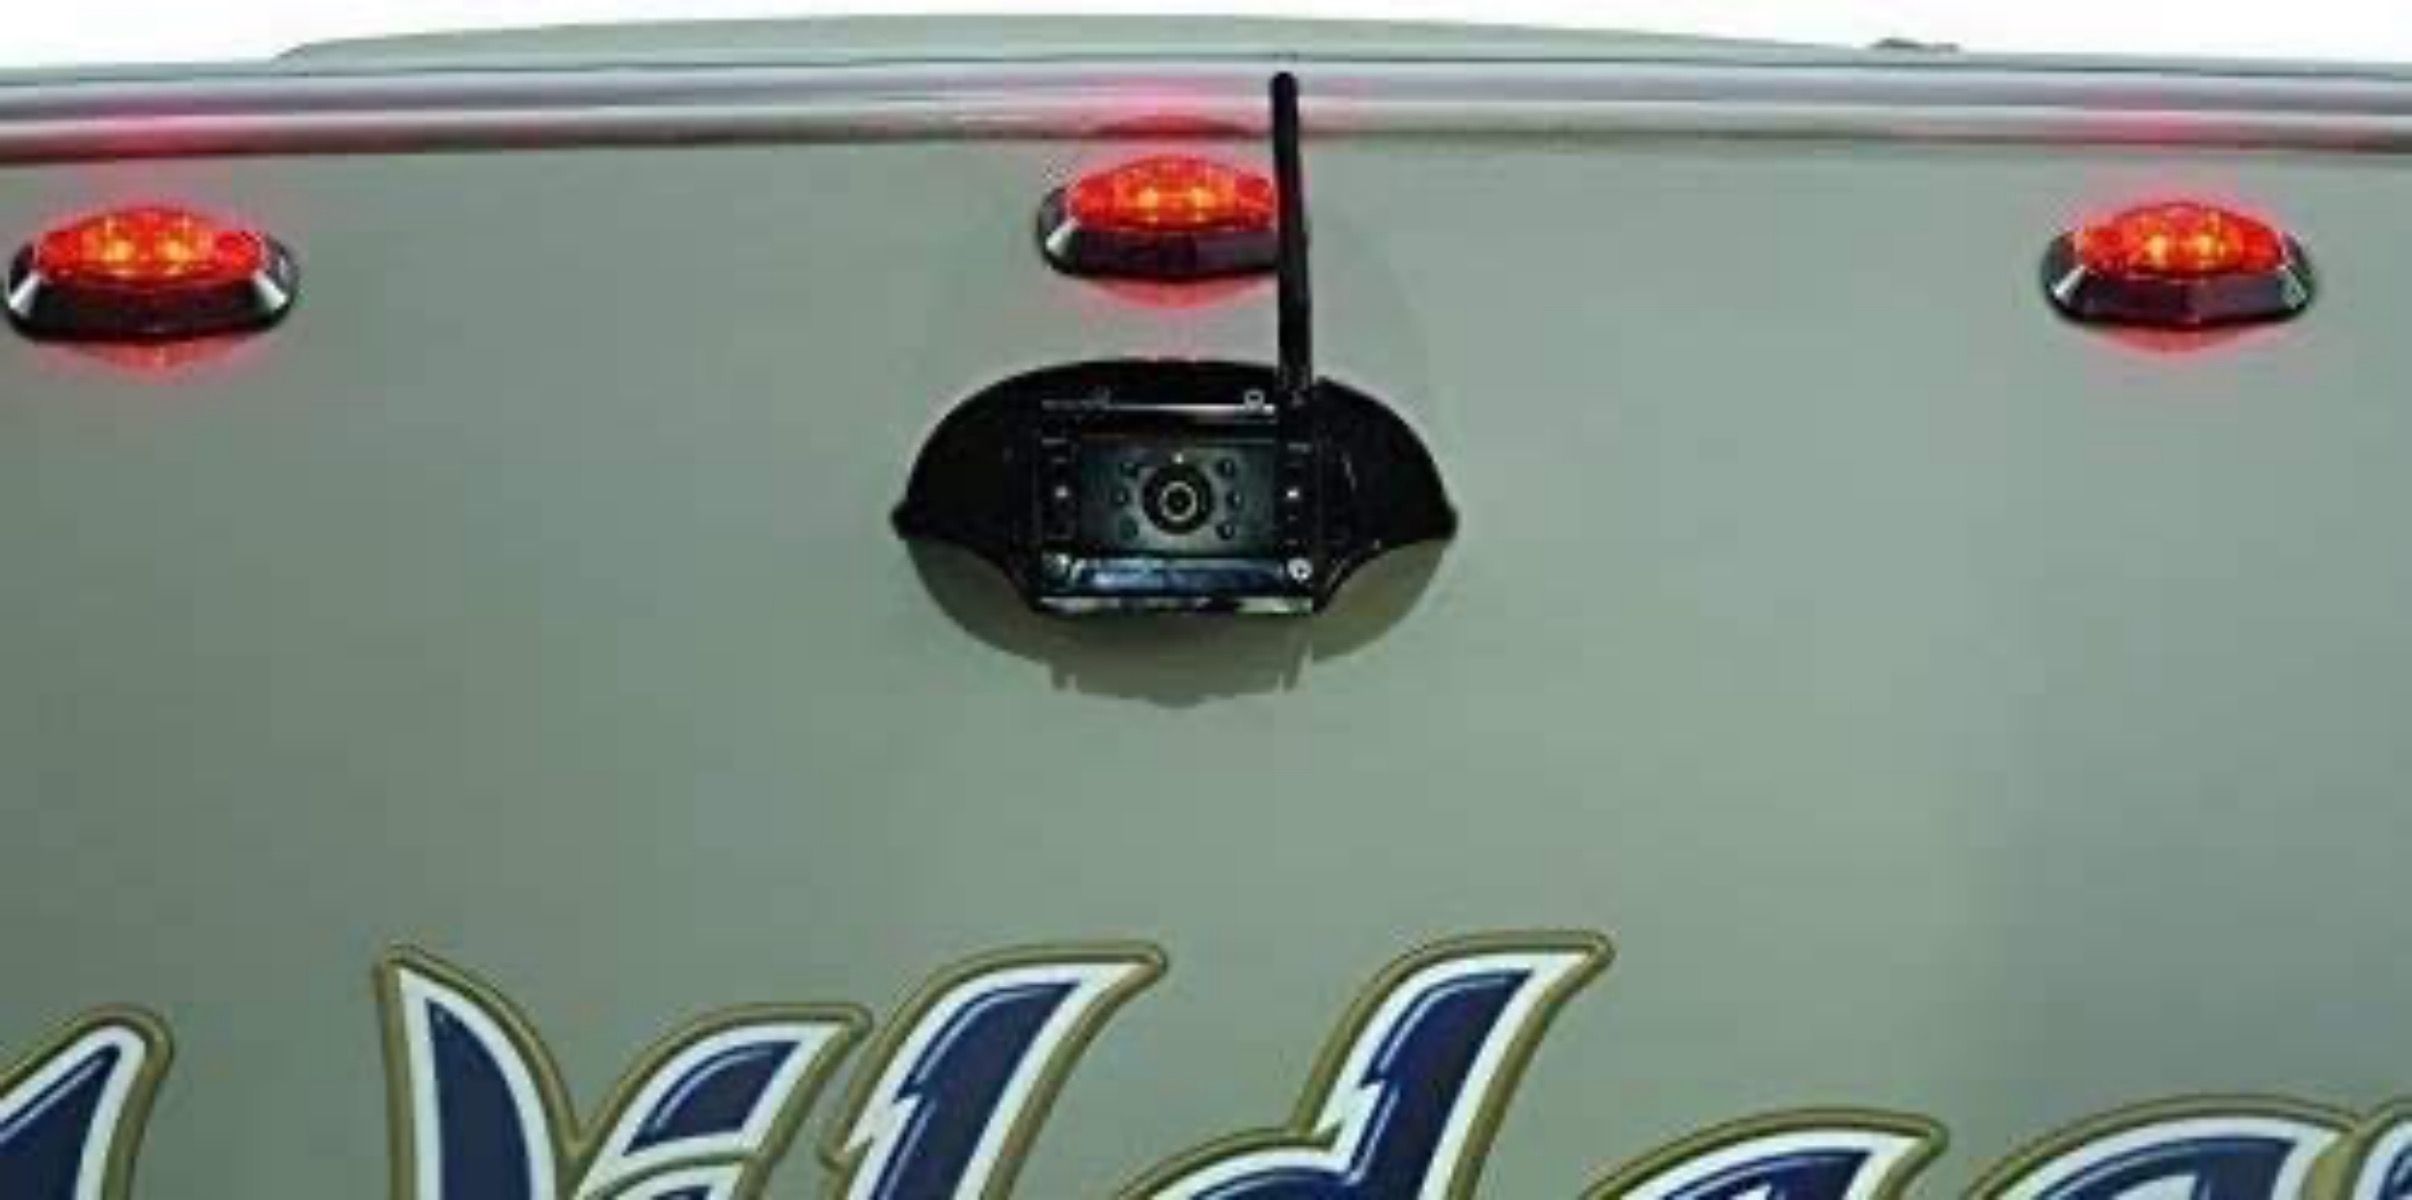 A Furrion Vision S RV backup system camera attached to RV